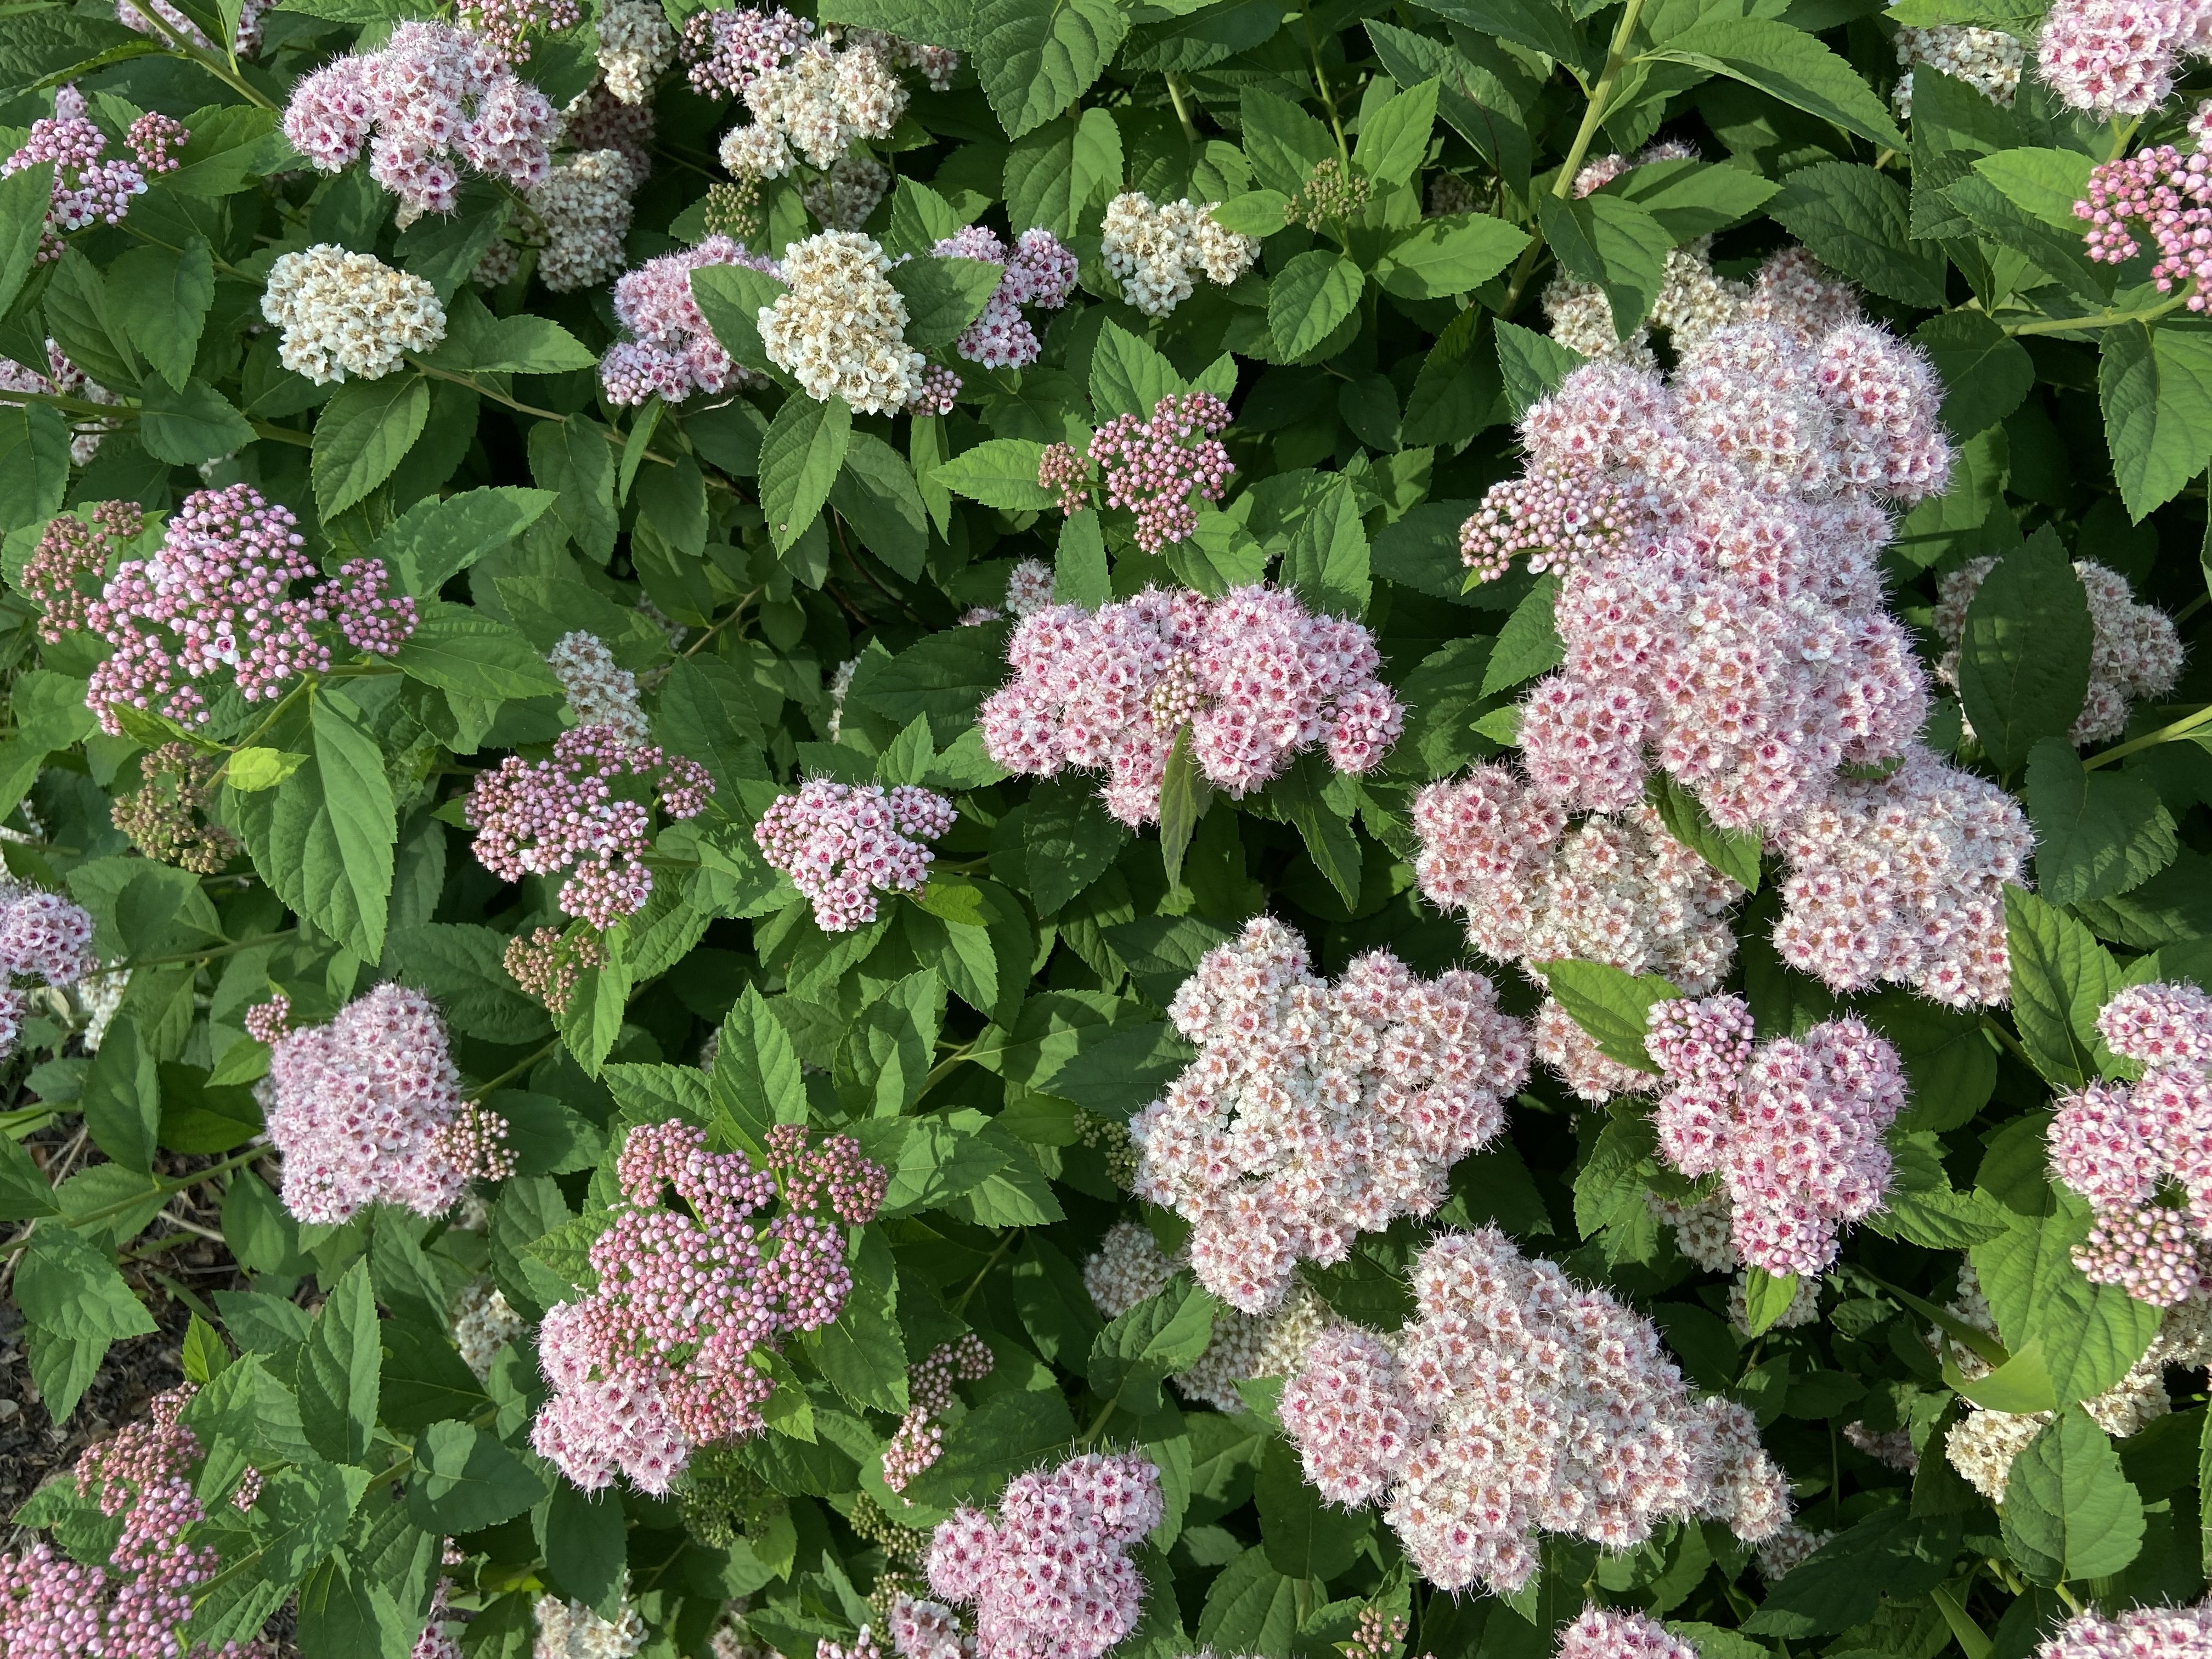 images/plants/spiraea/spi-pink-a-licious/spi-pink-a-licious-0007.jpg